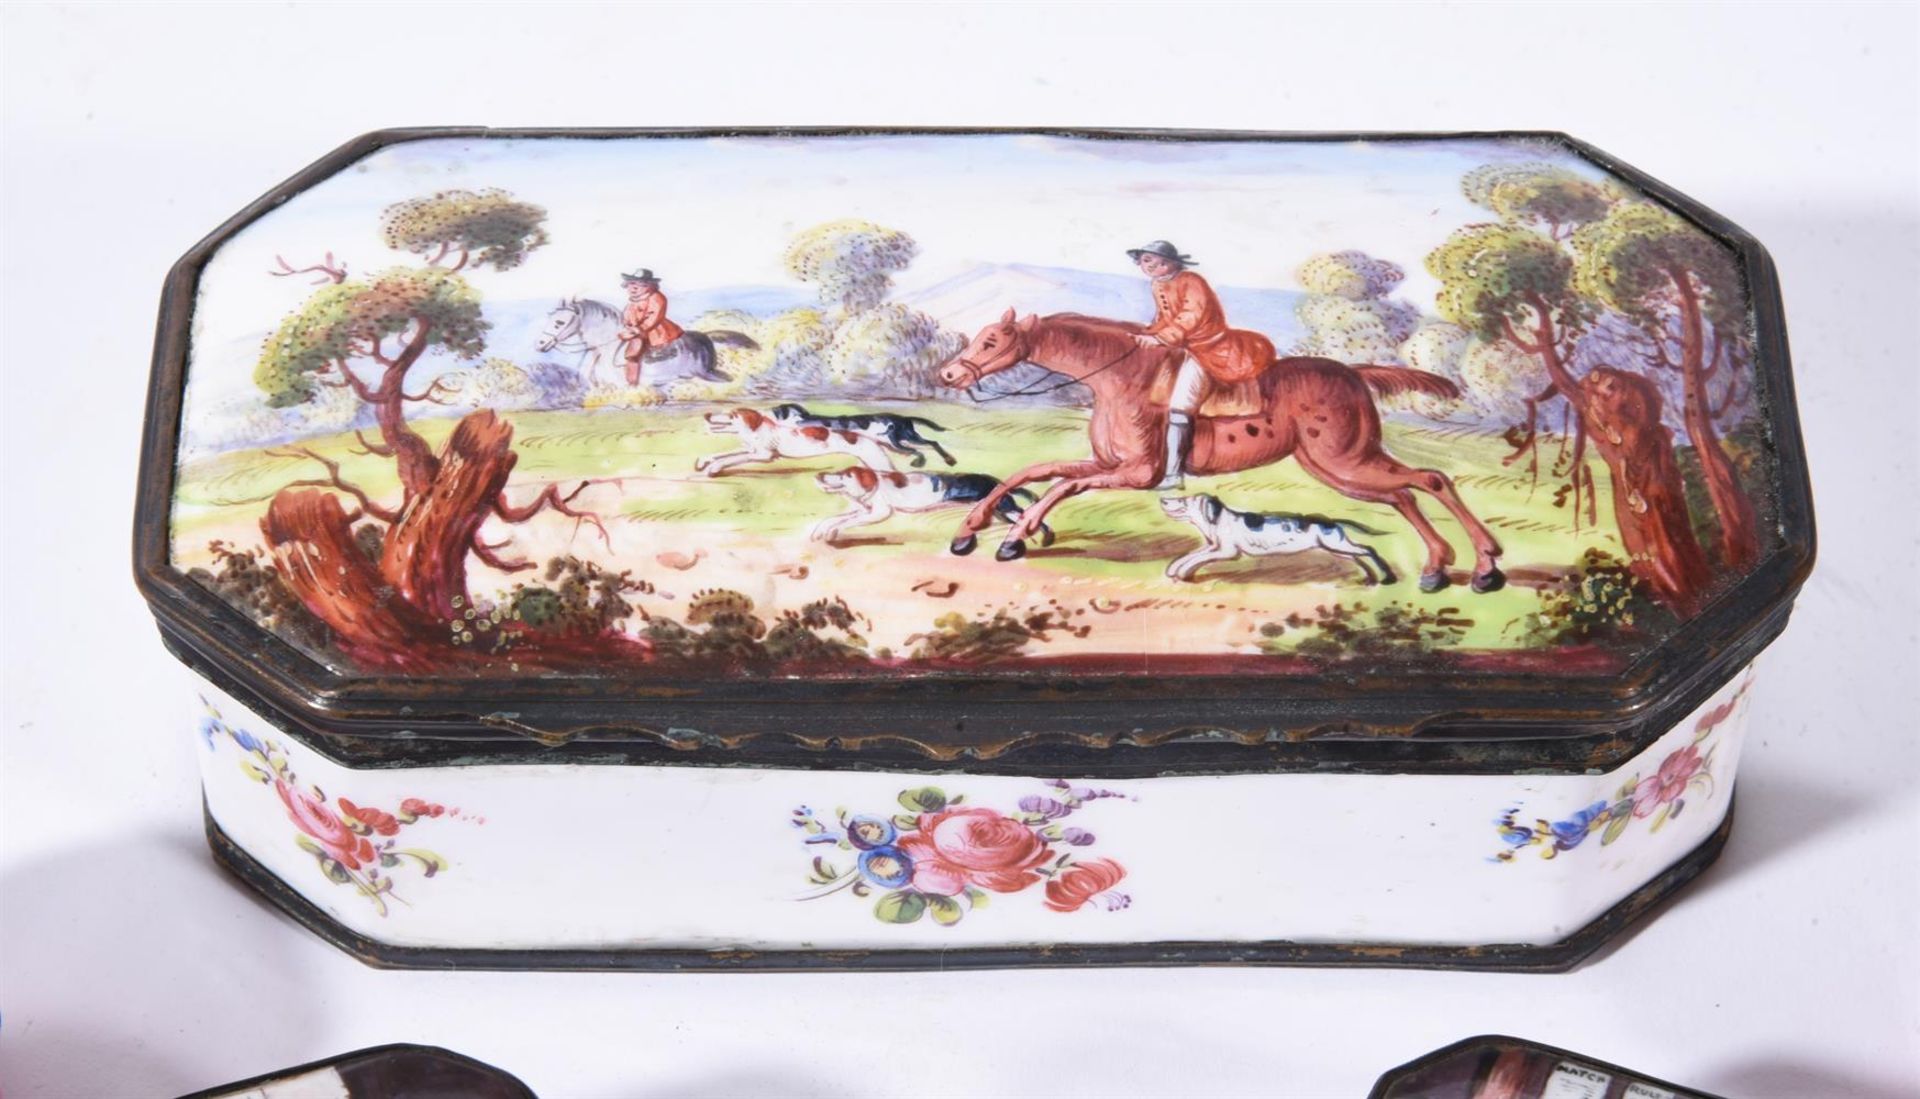 A LARGE STAFFORDSHIRE ENAMEL BOX DECORATED WITH HUNTING SCENE, LATE 18TH CENTURY - Image 3 of 4